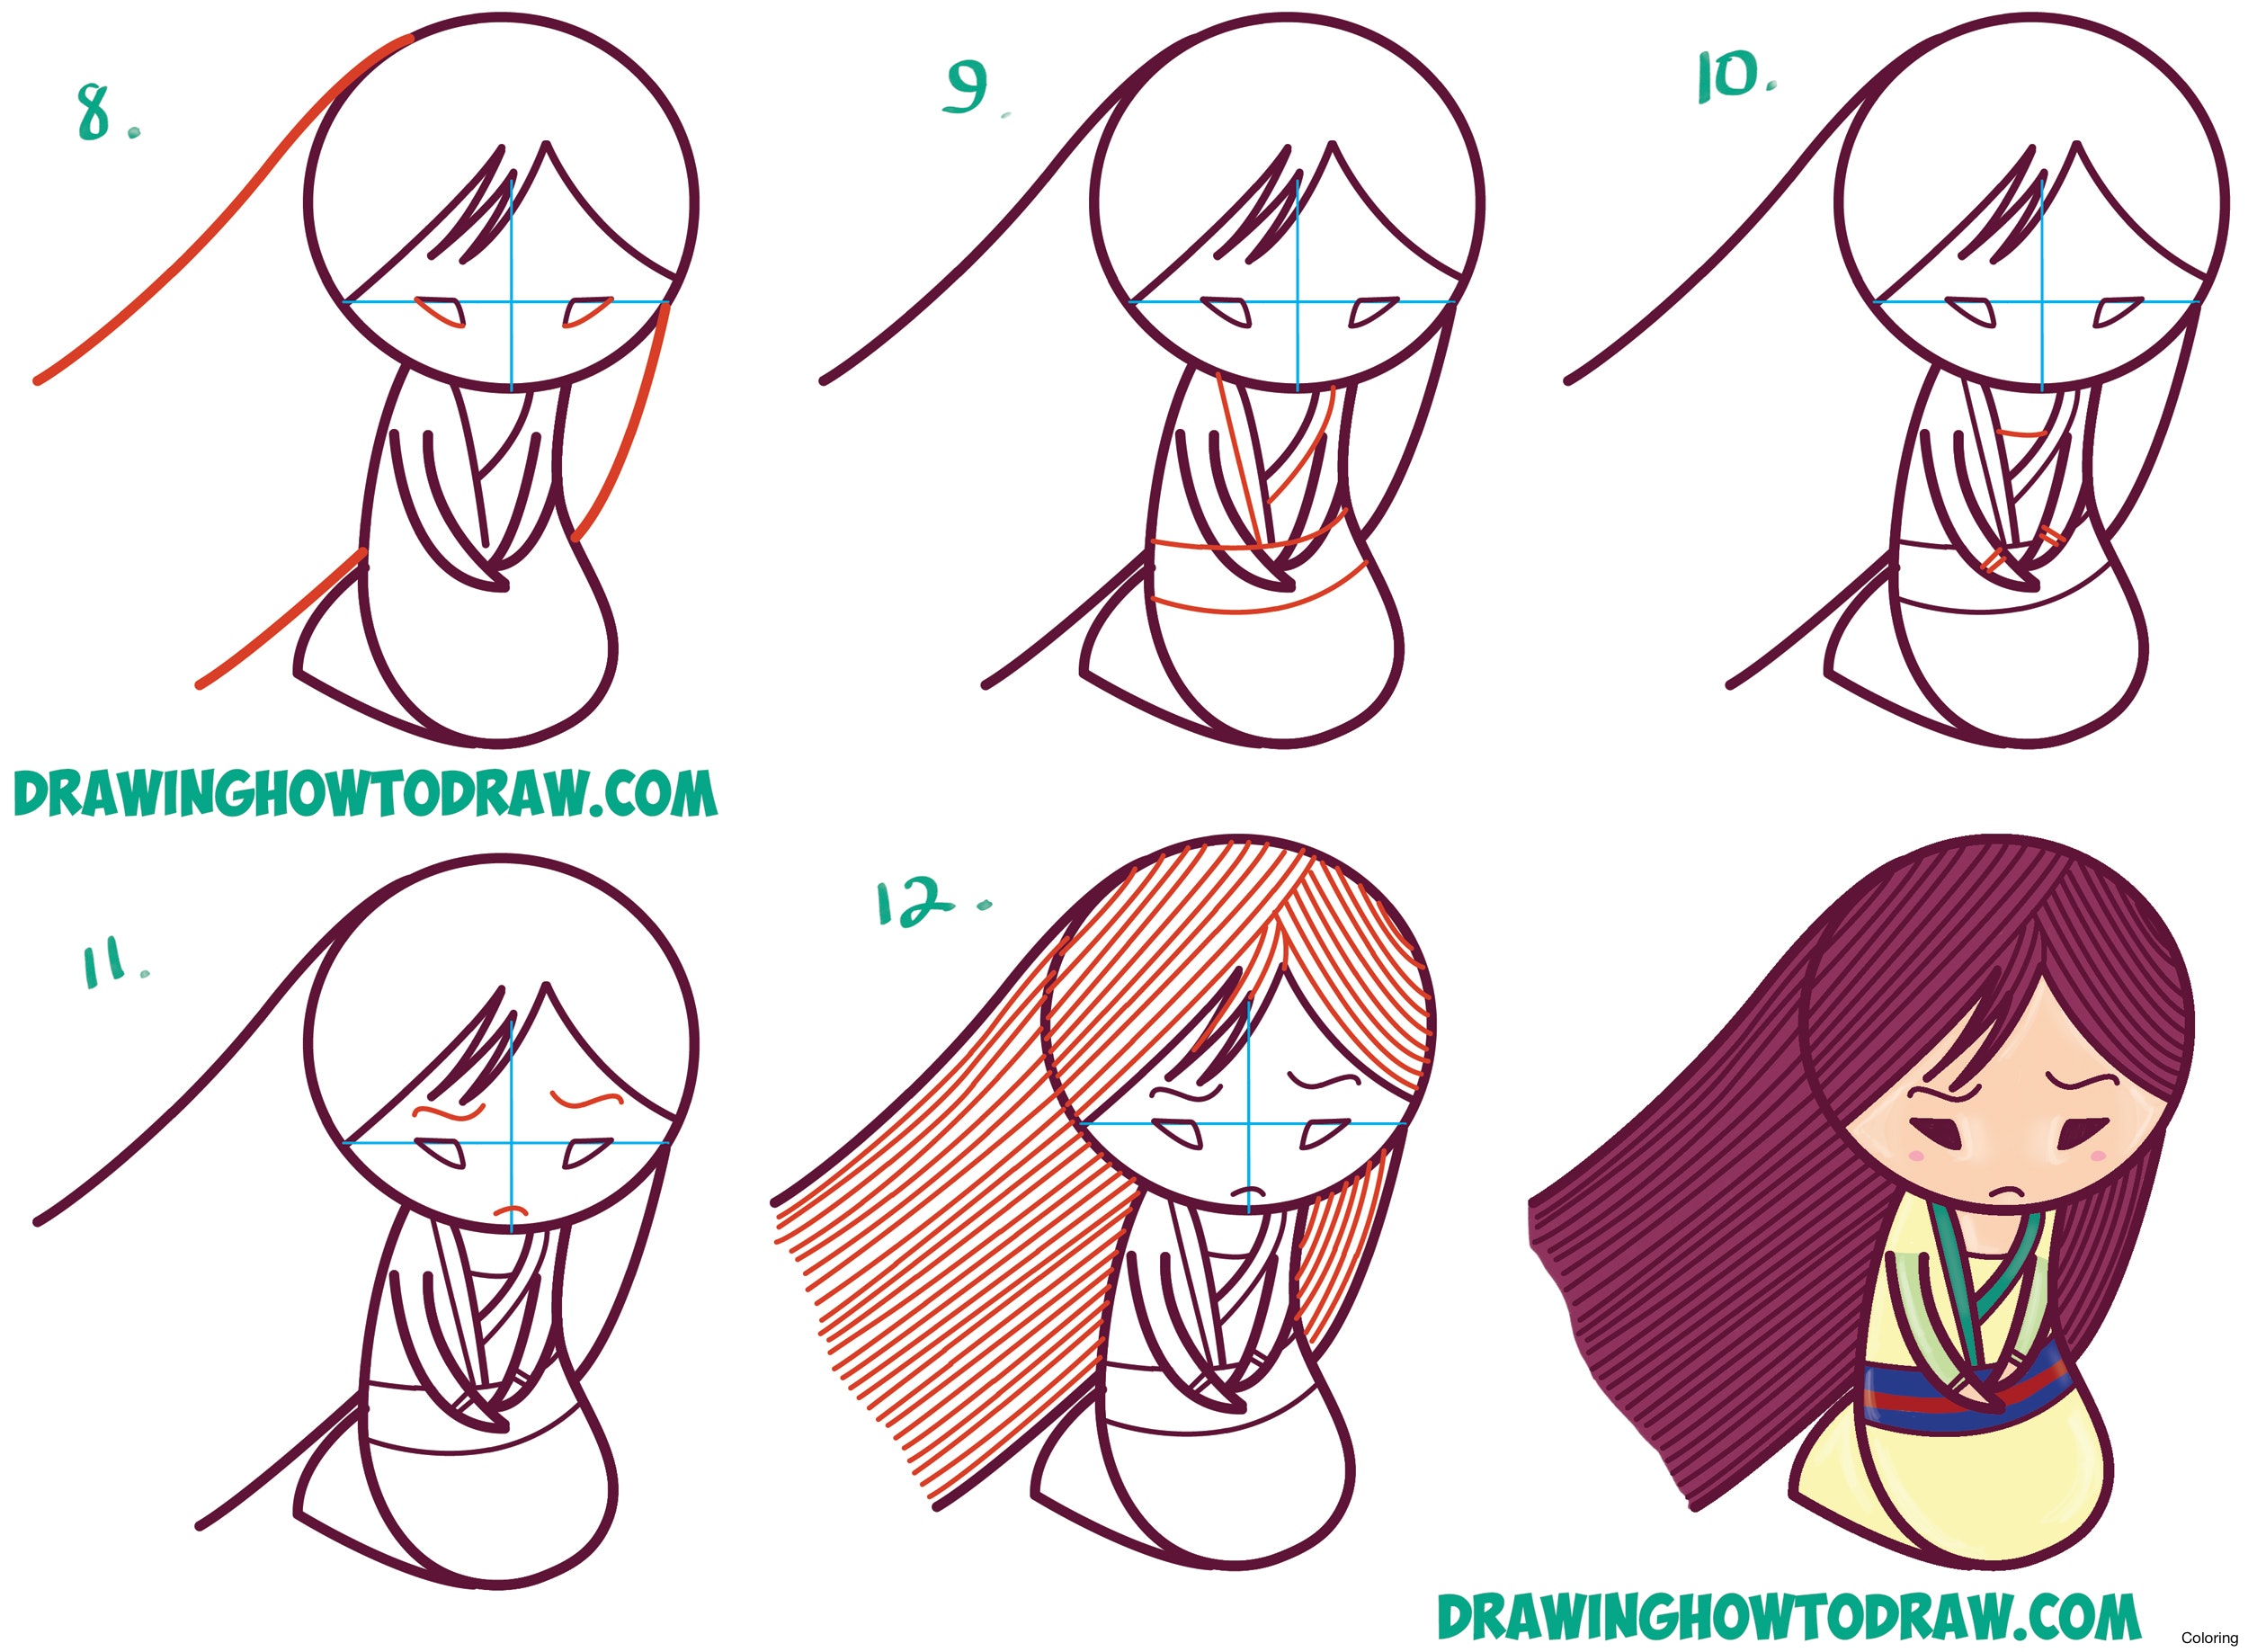 Great How To Draw Princess Step By Step of all time Check it out now 